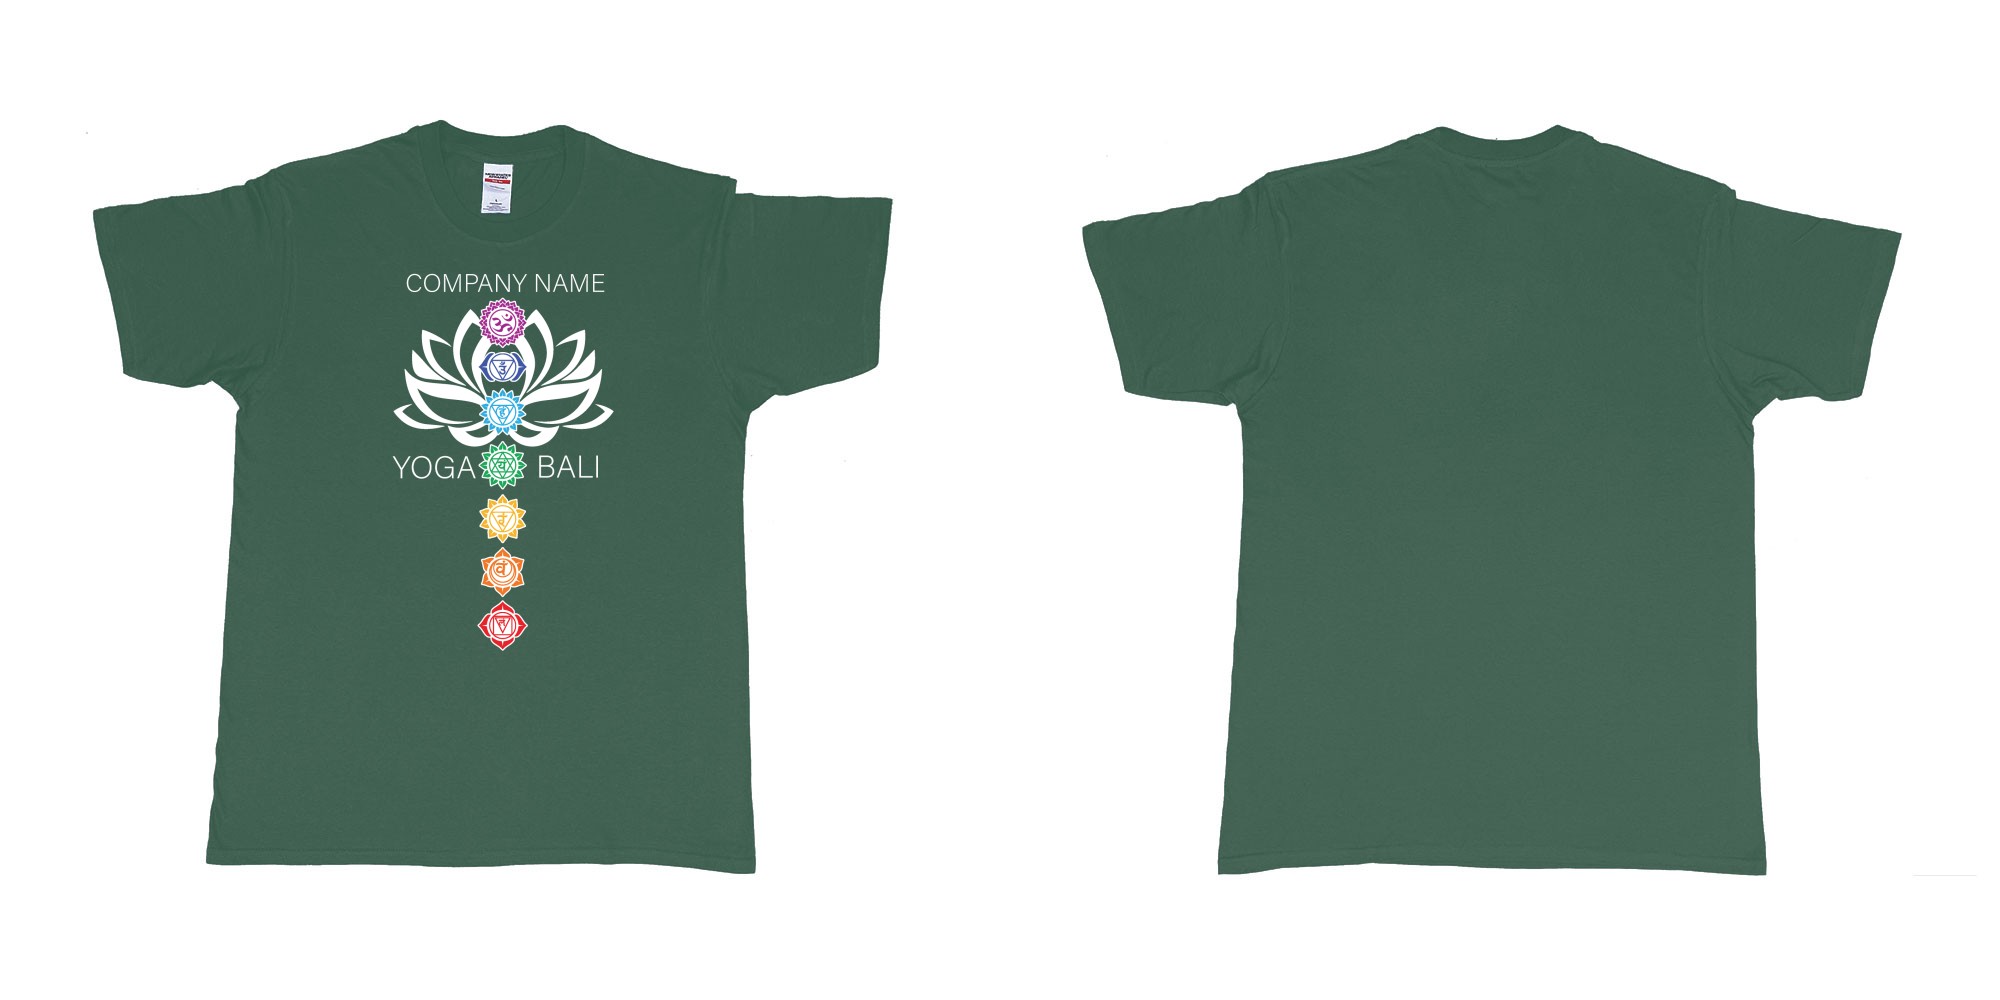 Custom tshirt design lotus flower chakras yoga hindi symbols for custom teeshirt printing in fabric color forest-green choice your own text made in Bali by The Pirate Way